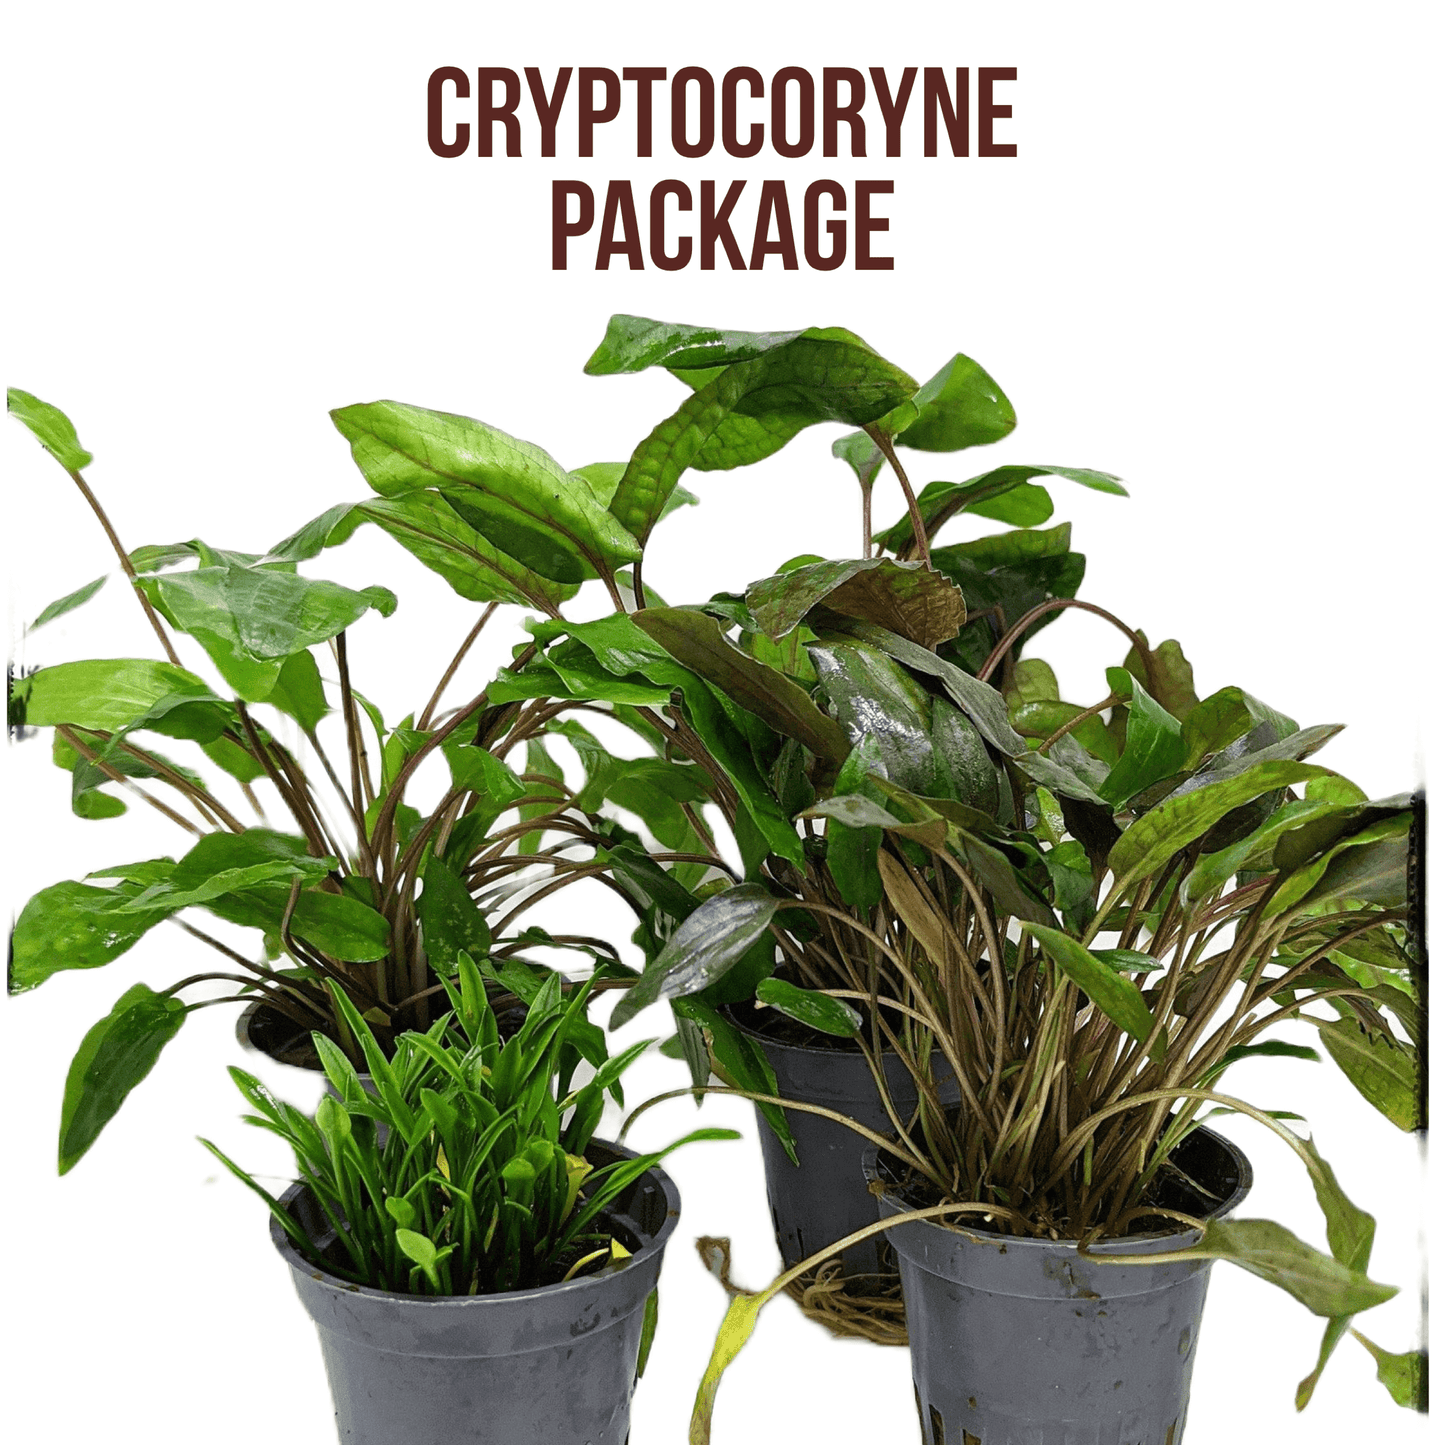 Cryptocoryne package Dennerle Plants